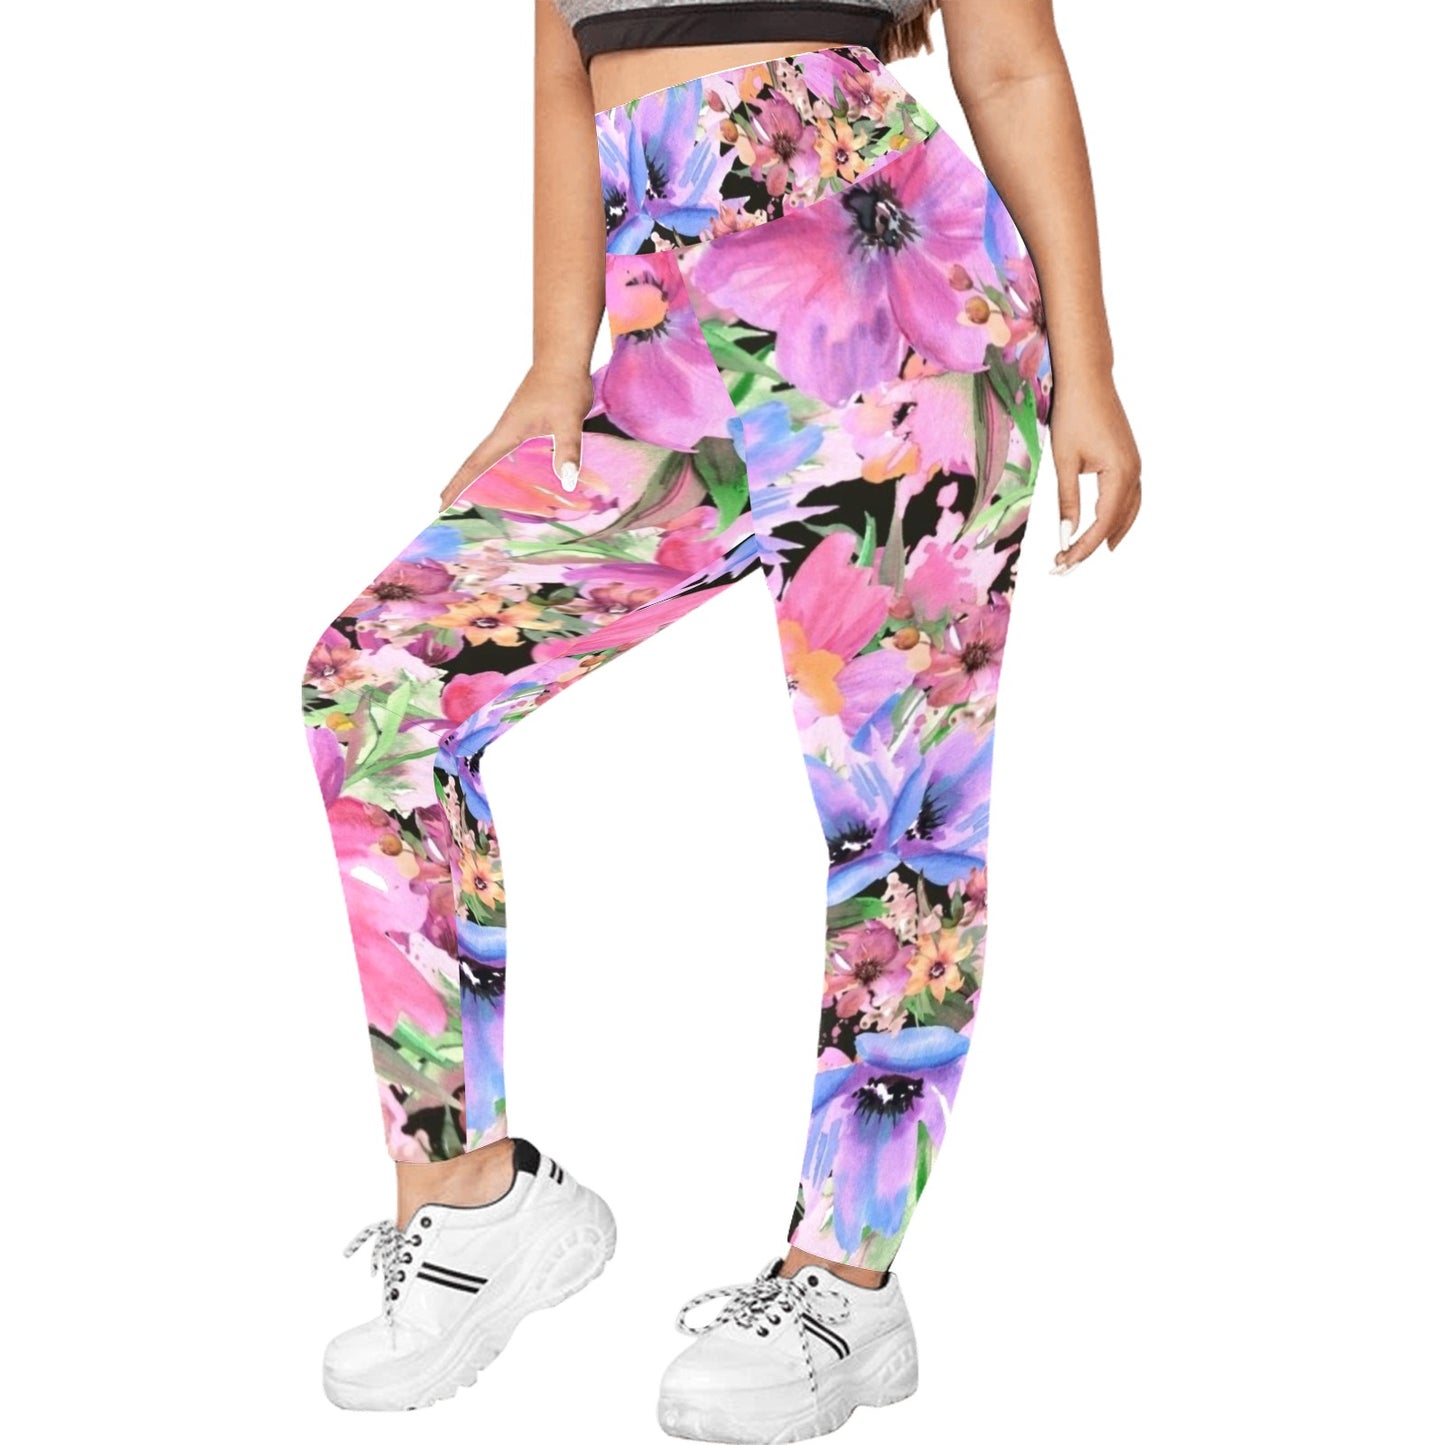 Bright Pink Floral - Women's Plus Size High Waist Leggings Women's Plus Size High Waist Leggings